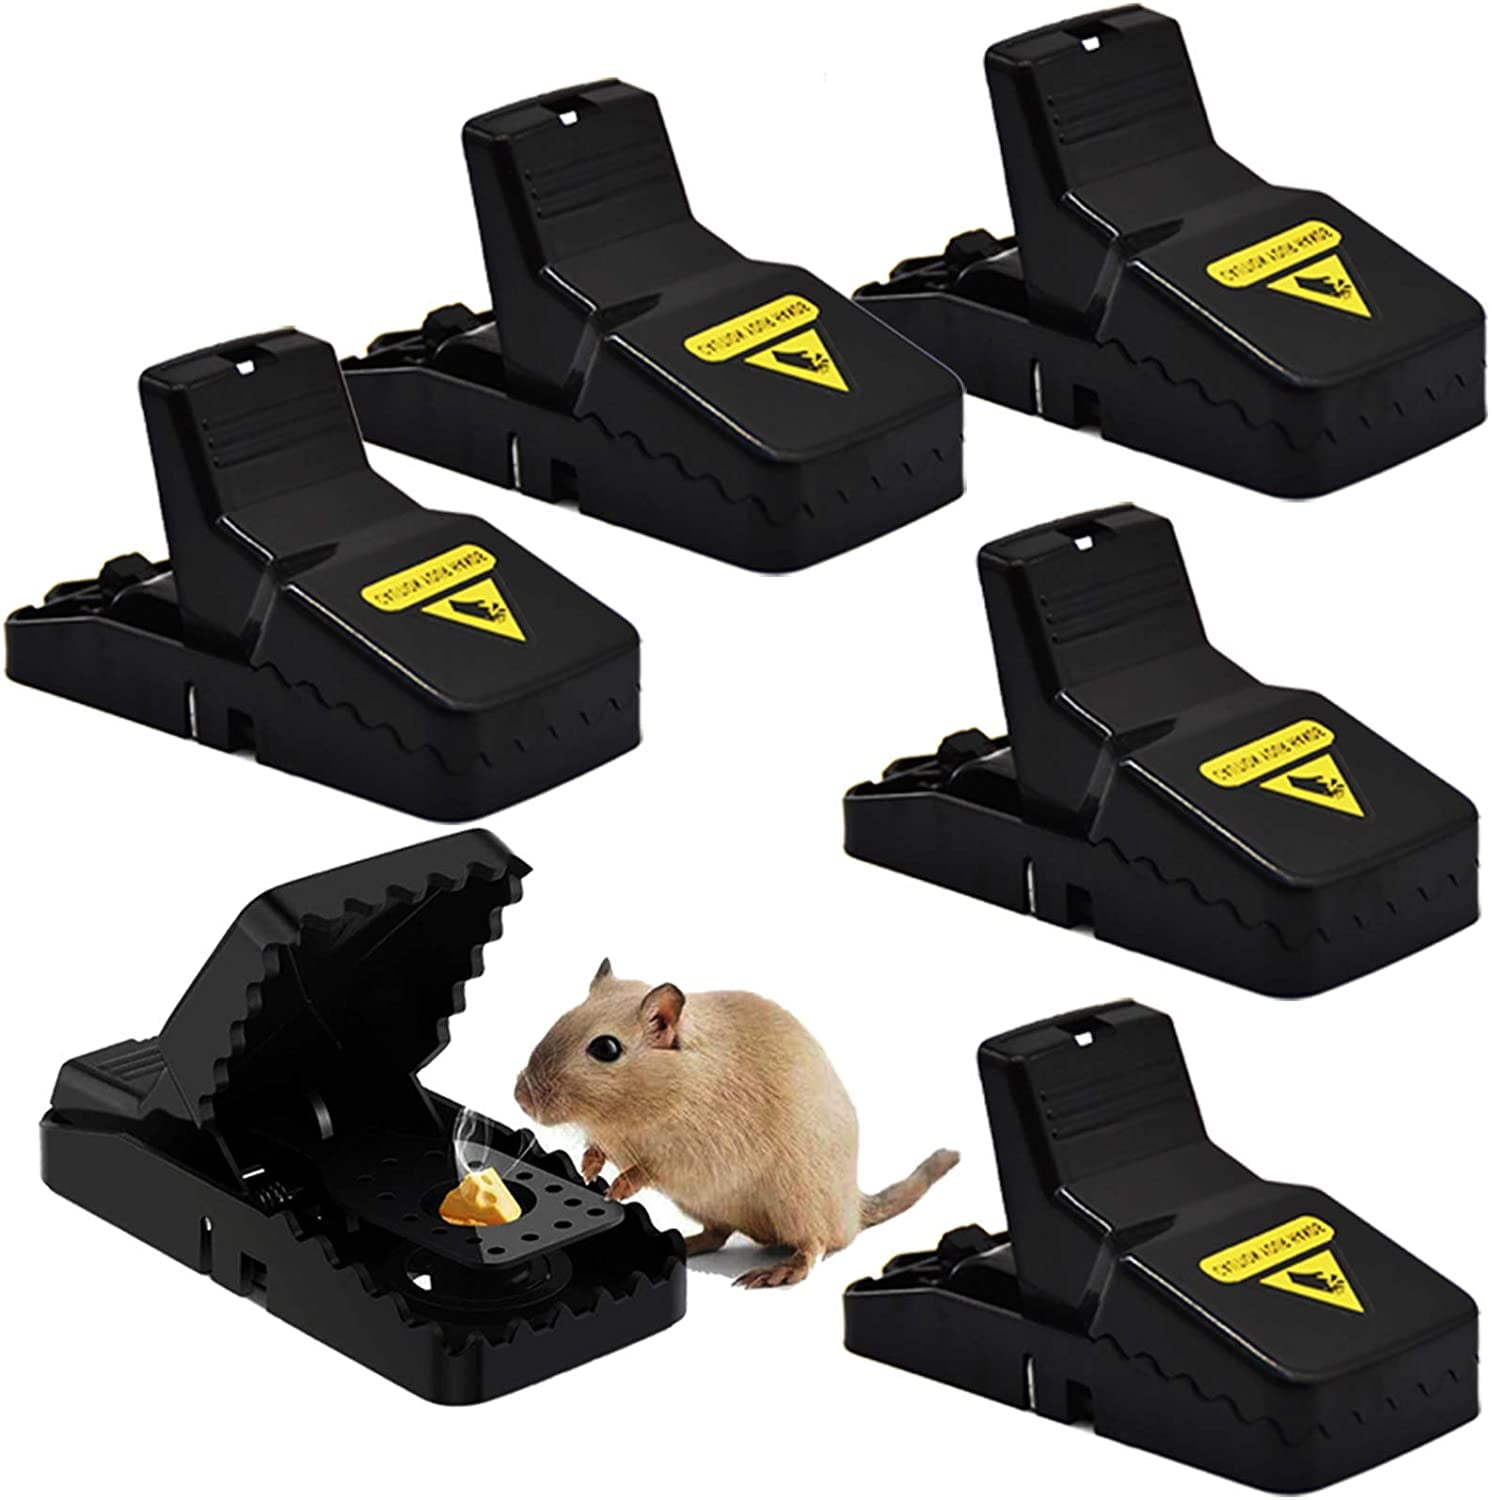 Snap Mouse Rodent Trap Kills Mice Wood Wire Spring Style Pest Control 20 PK NEW 